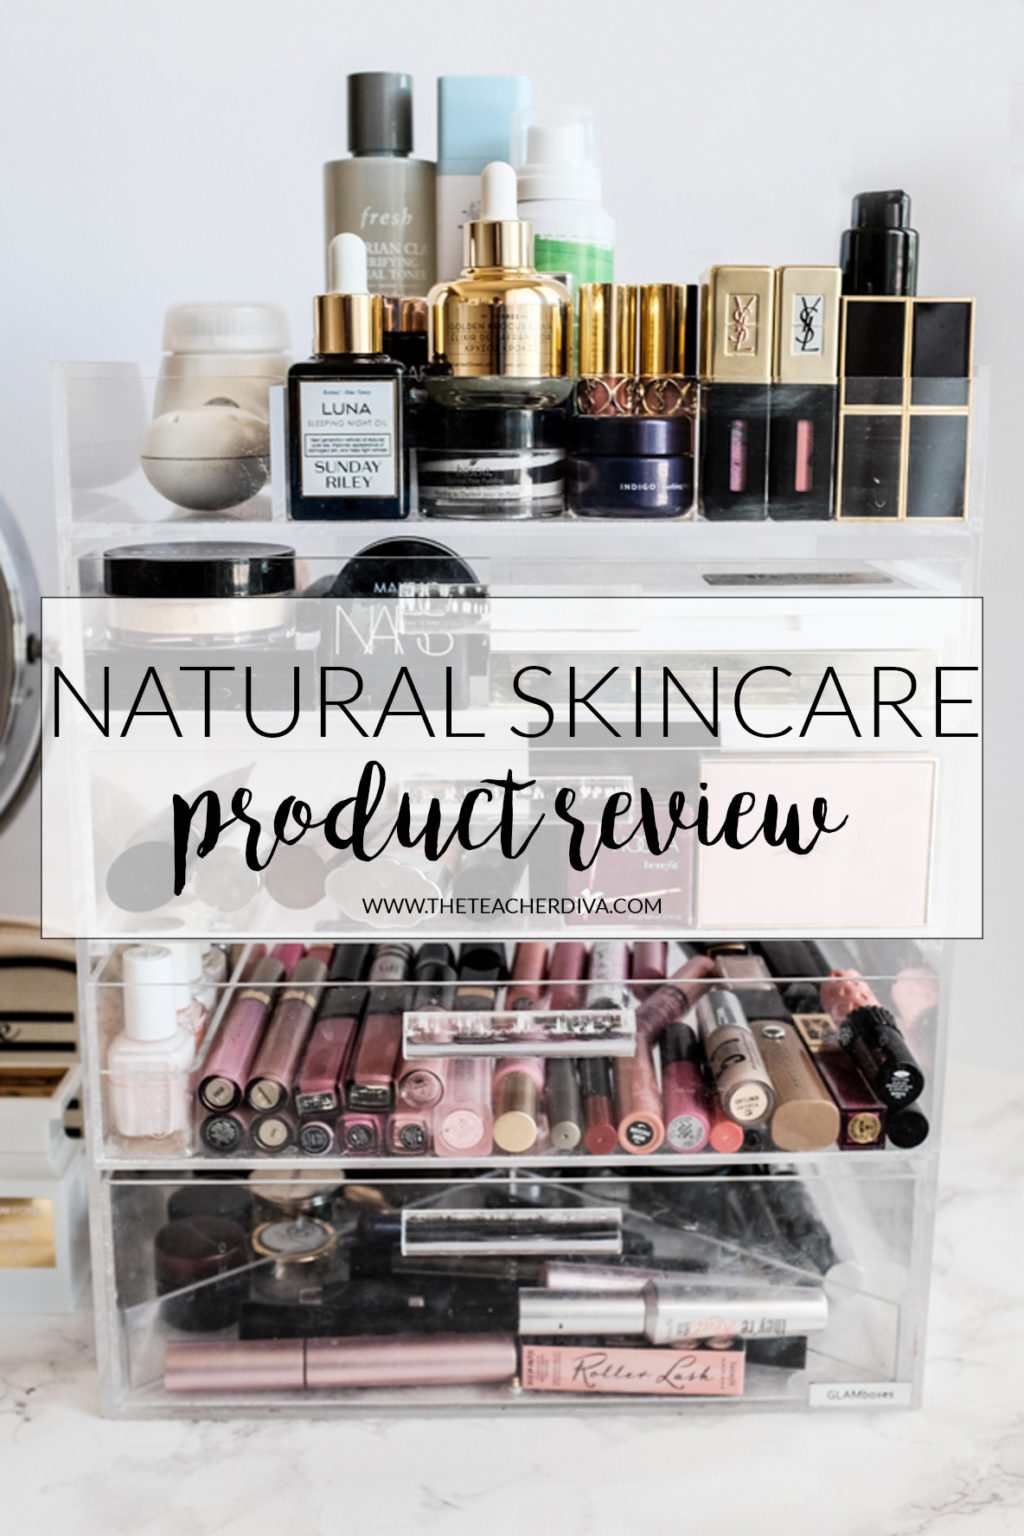 Beauty Talk: Natural Skincare (and giveaway!)